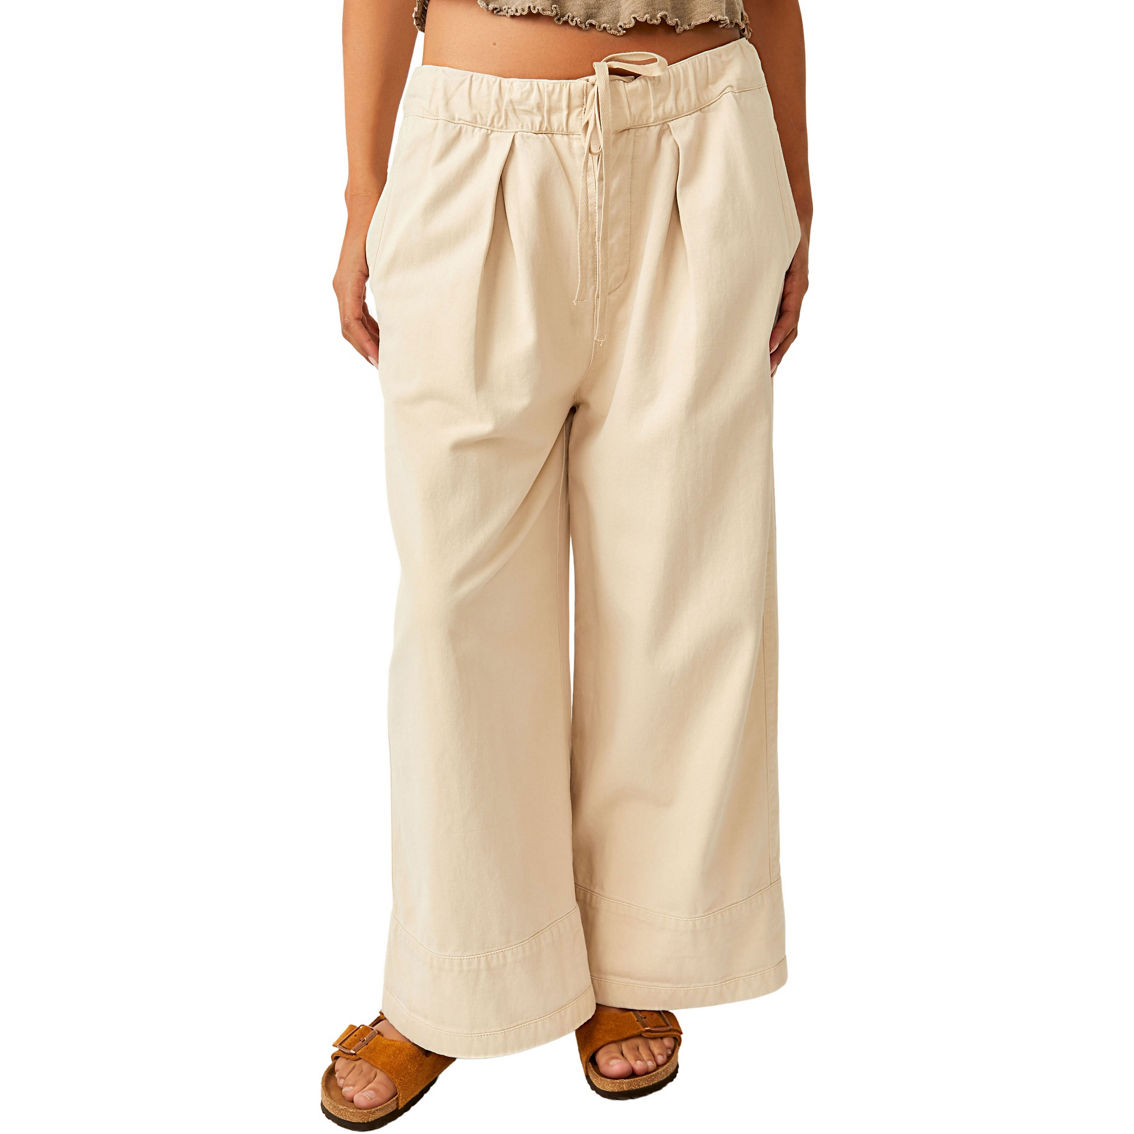 Free People After Love Cuff Pants | Pants | Clothing & Accessories ...